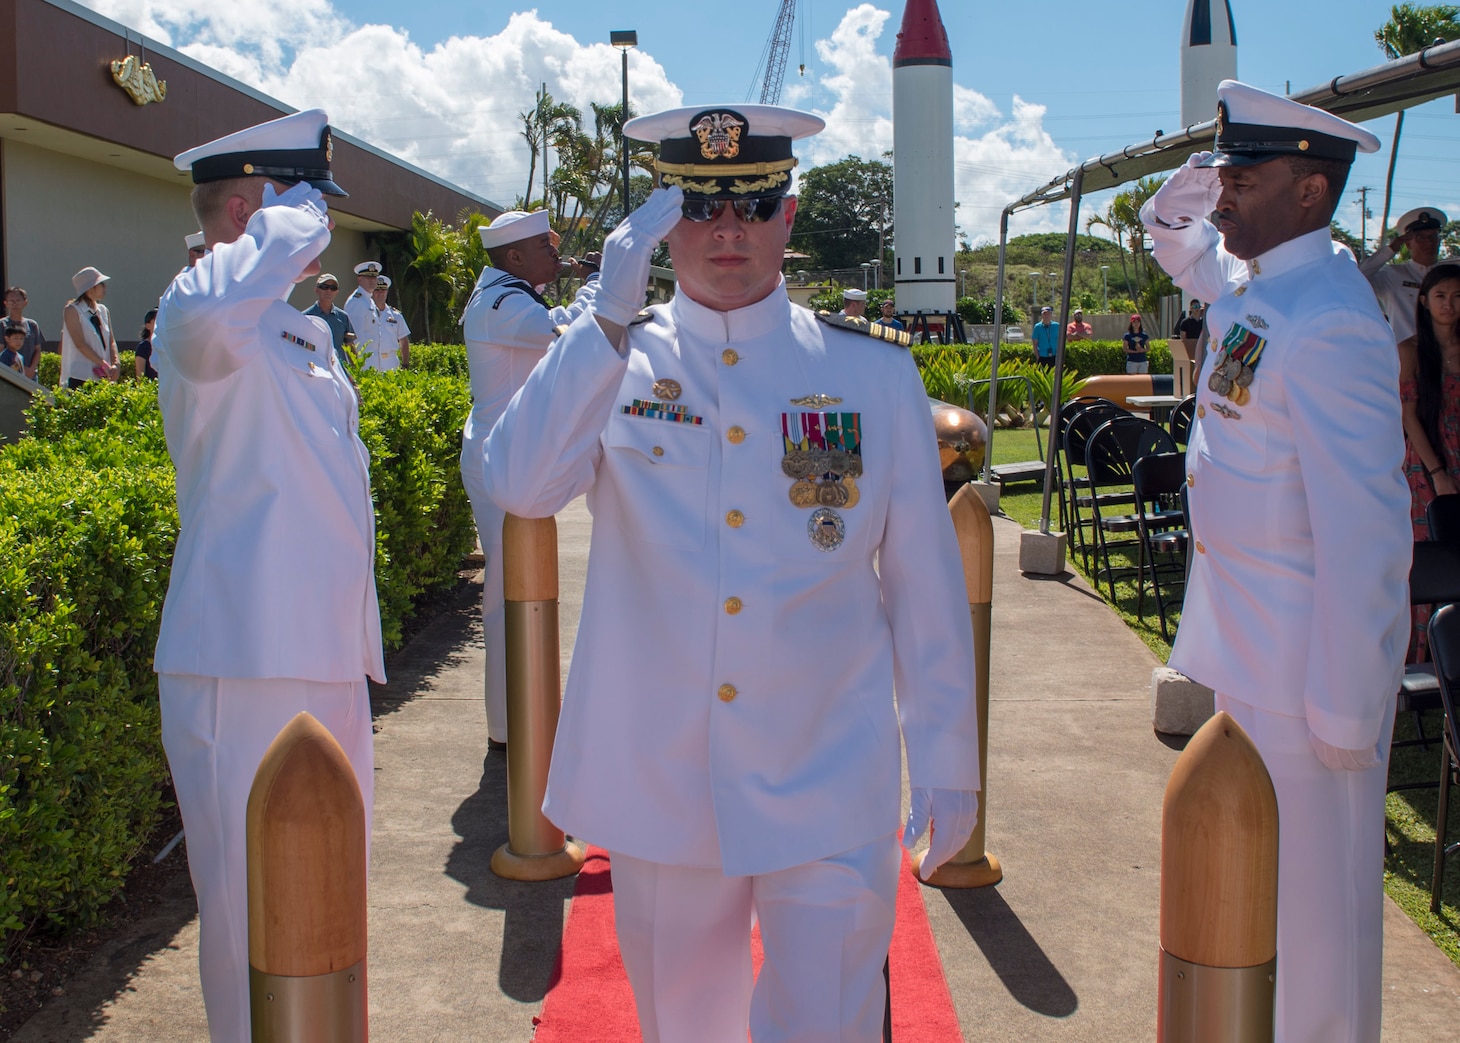 PEARL HARBOR (Aug. 31, 2018) - Cmdr. Brian Turney is piped aboard during the Los Angeles-class fast-attack submarine USS Chicago (SSN 721) change of command ceremony at the USS Bowfin Submarine Museum and Park in Pearl Harbor, Hawaii, Aug. 31. (U.S. Navy photo by Mass Communication Specialist 2nd Class Shaun Griffin/Released)